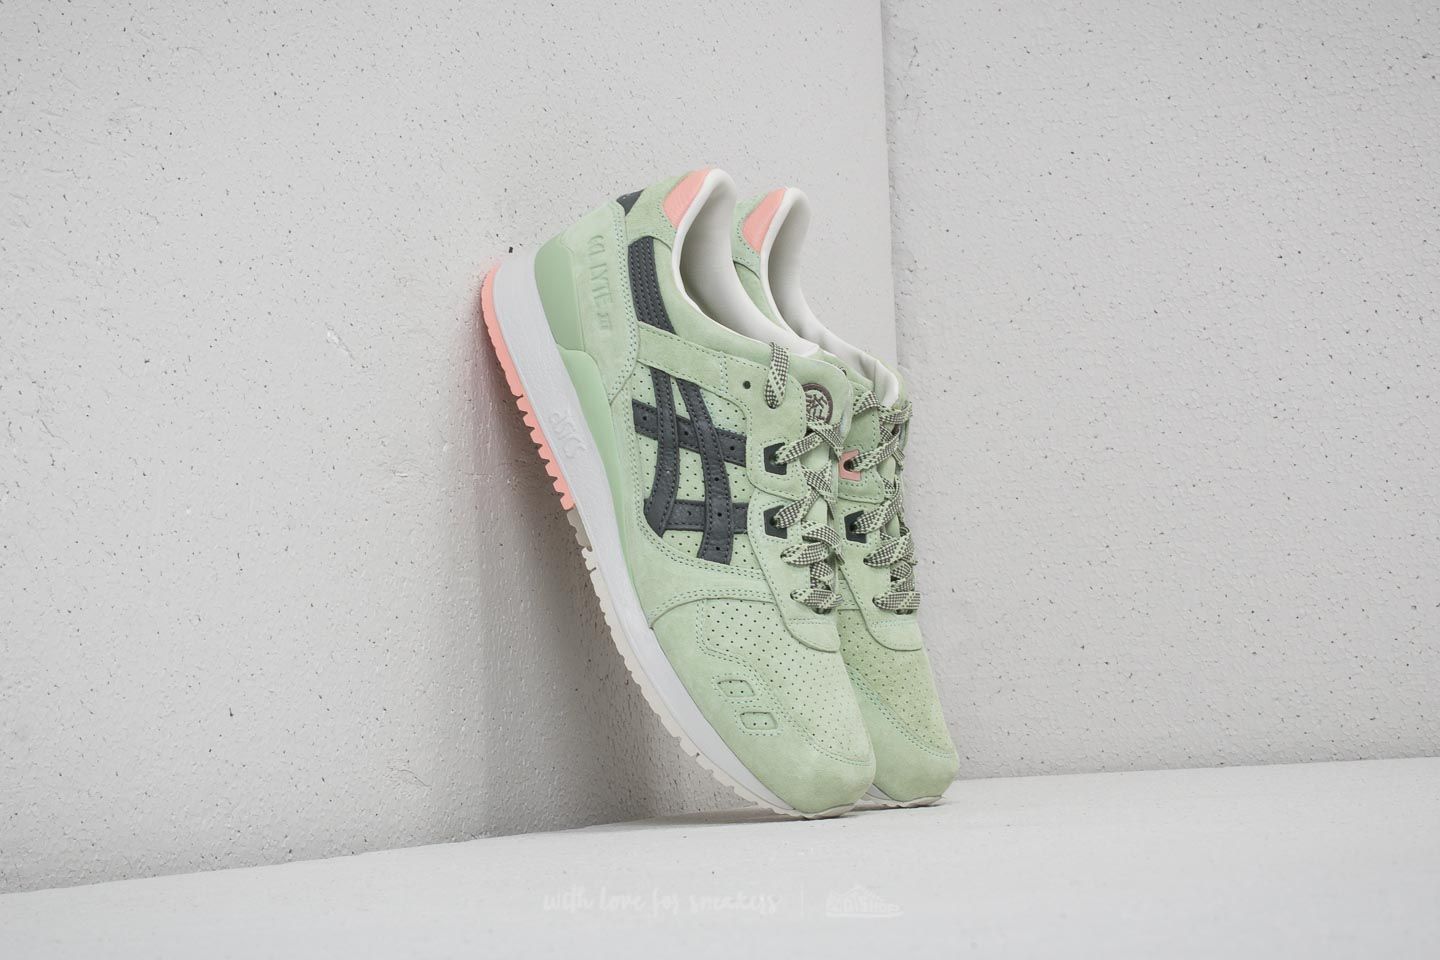 Men's shoes Asics Tiger x End. “Wasabi” Gel-Lyte III Green Gecko/ Taup Grey